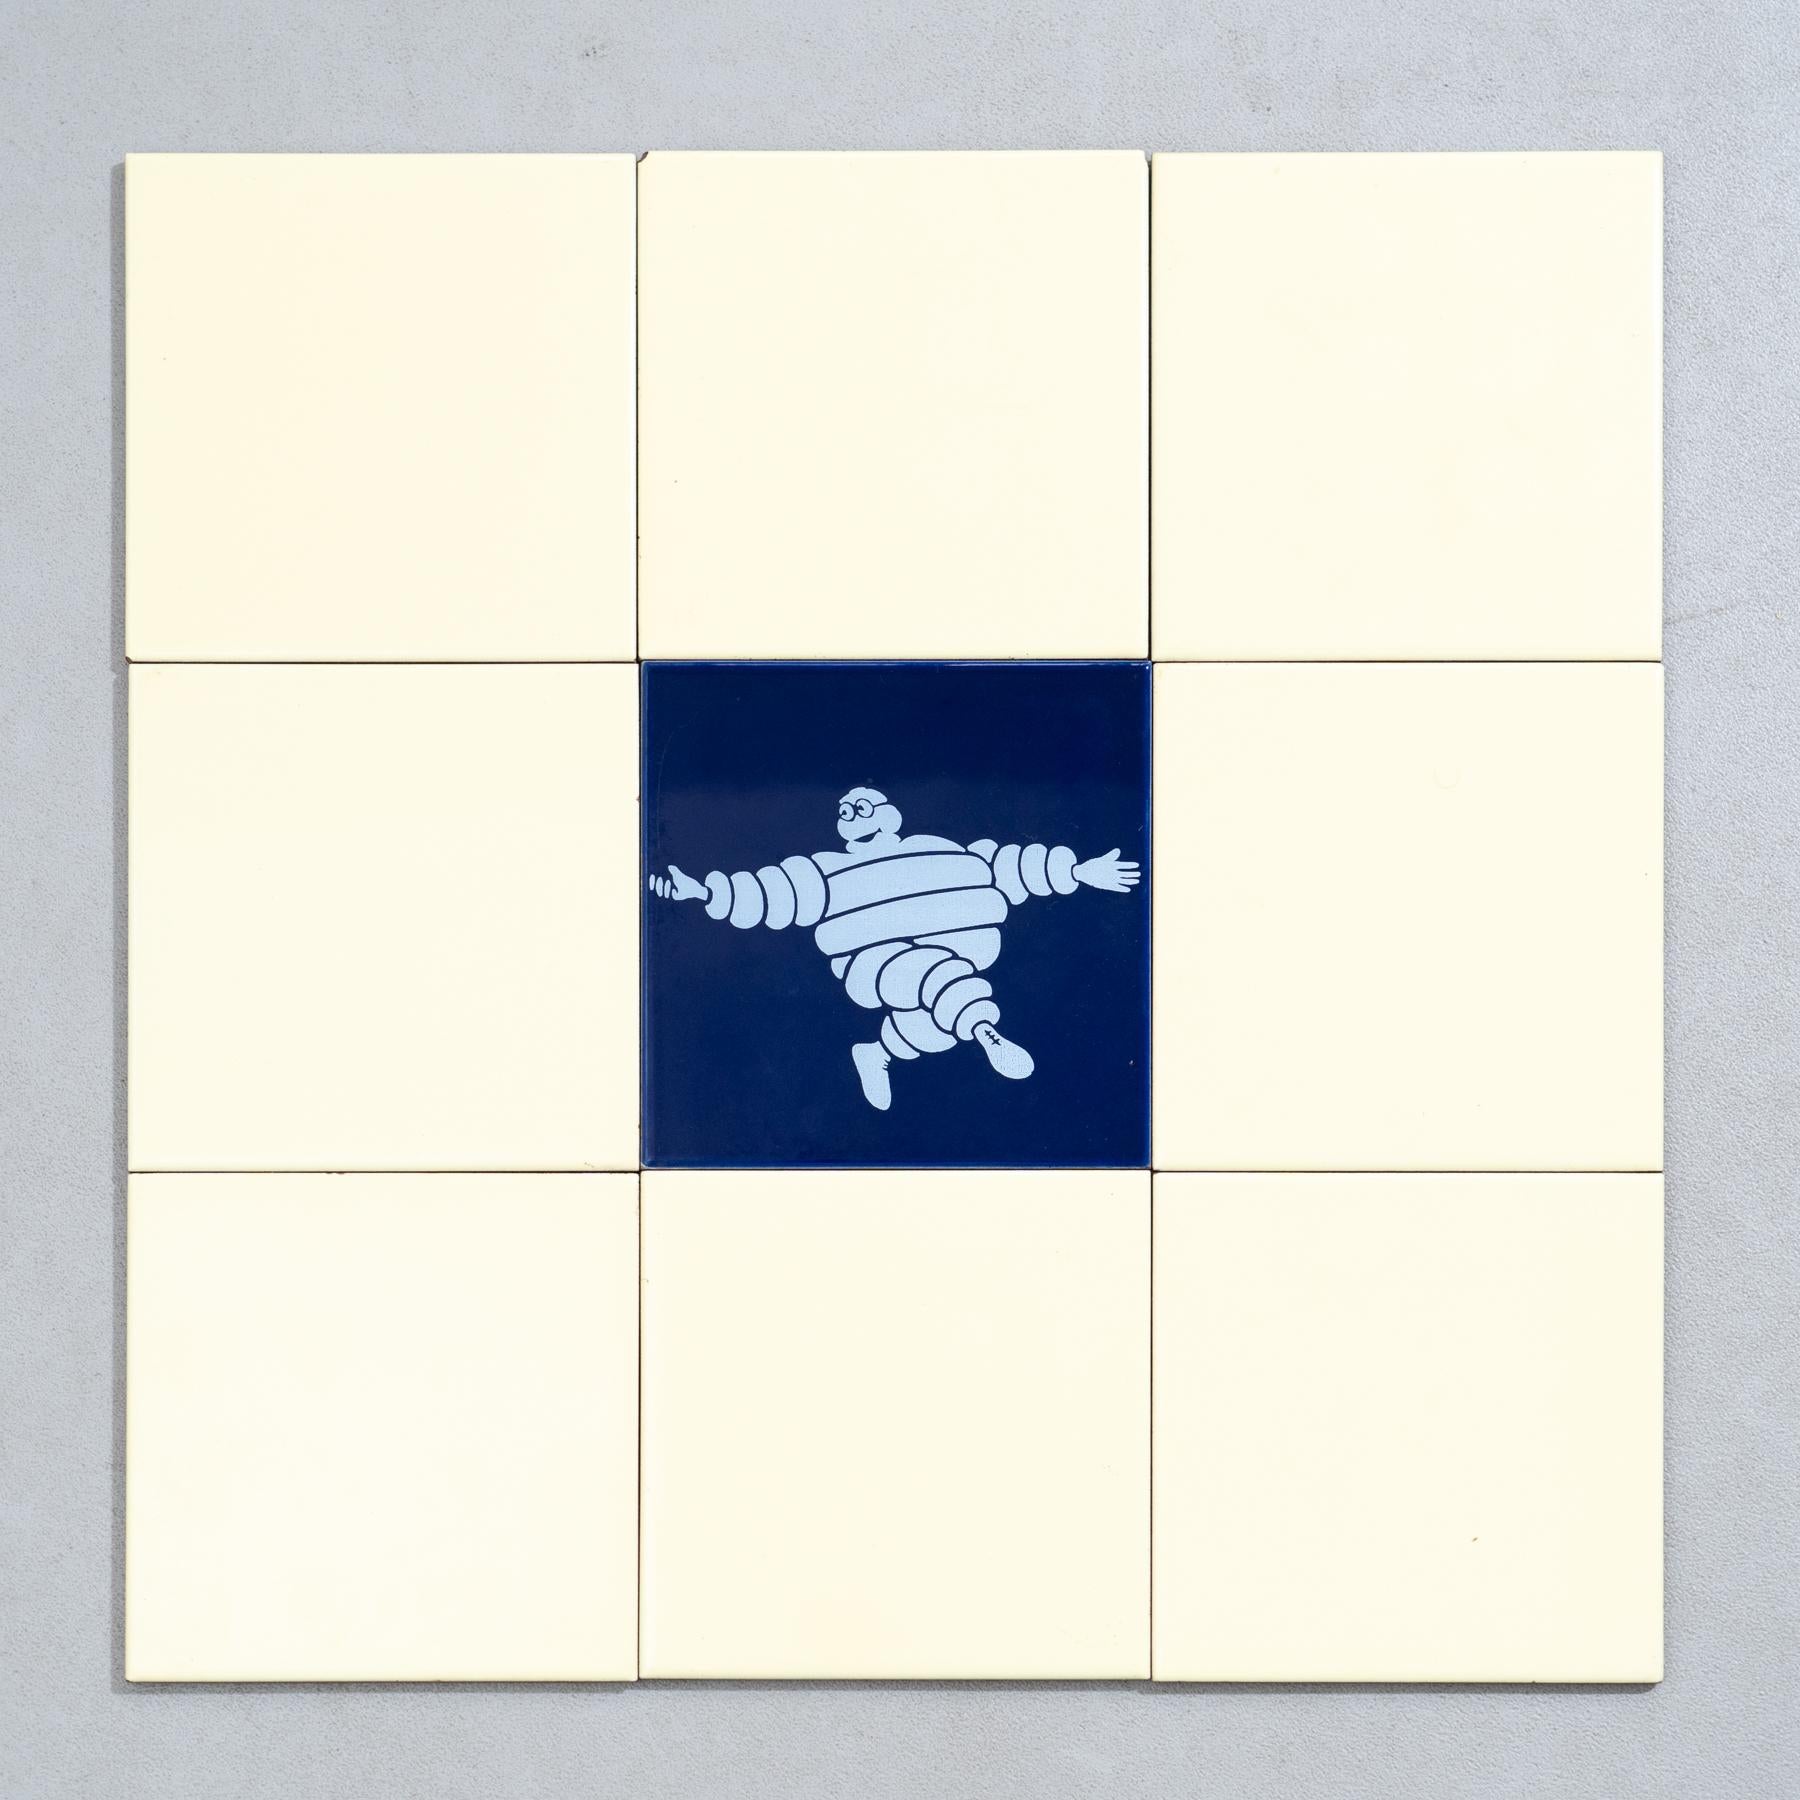 Embark on a journey of vintage charm with this exceptional set of nine tiles, featuring the iconic Michelin Man in a vibrant blue centerpiece, surrounded by original yellow tiles. Crafted by an unknown manufacturer in Spain circa 1960, this set is a